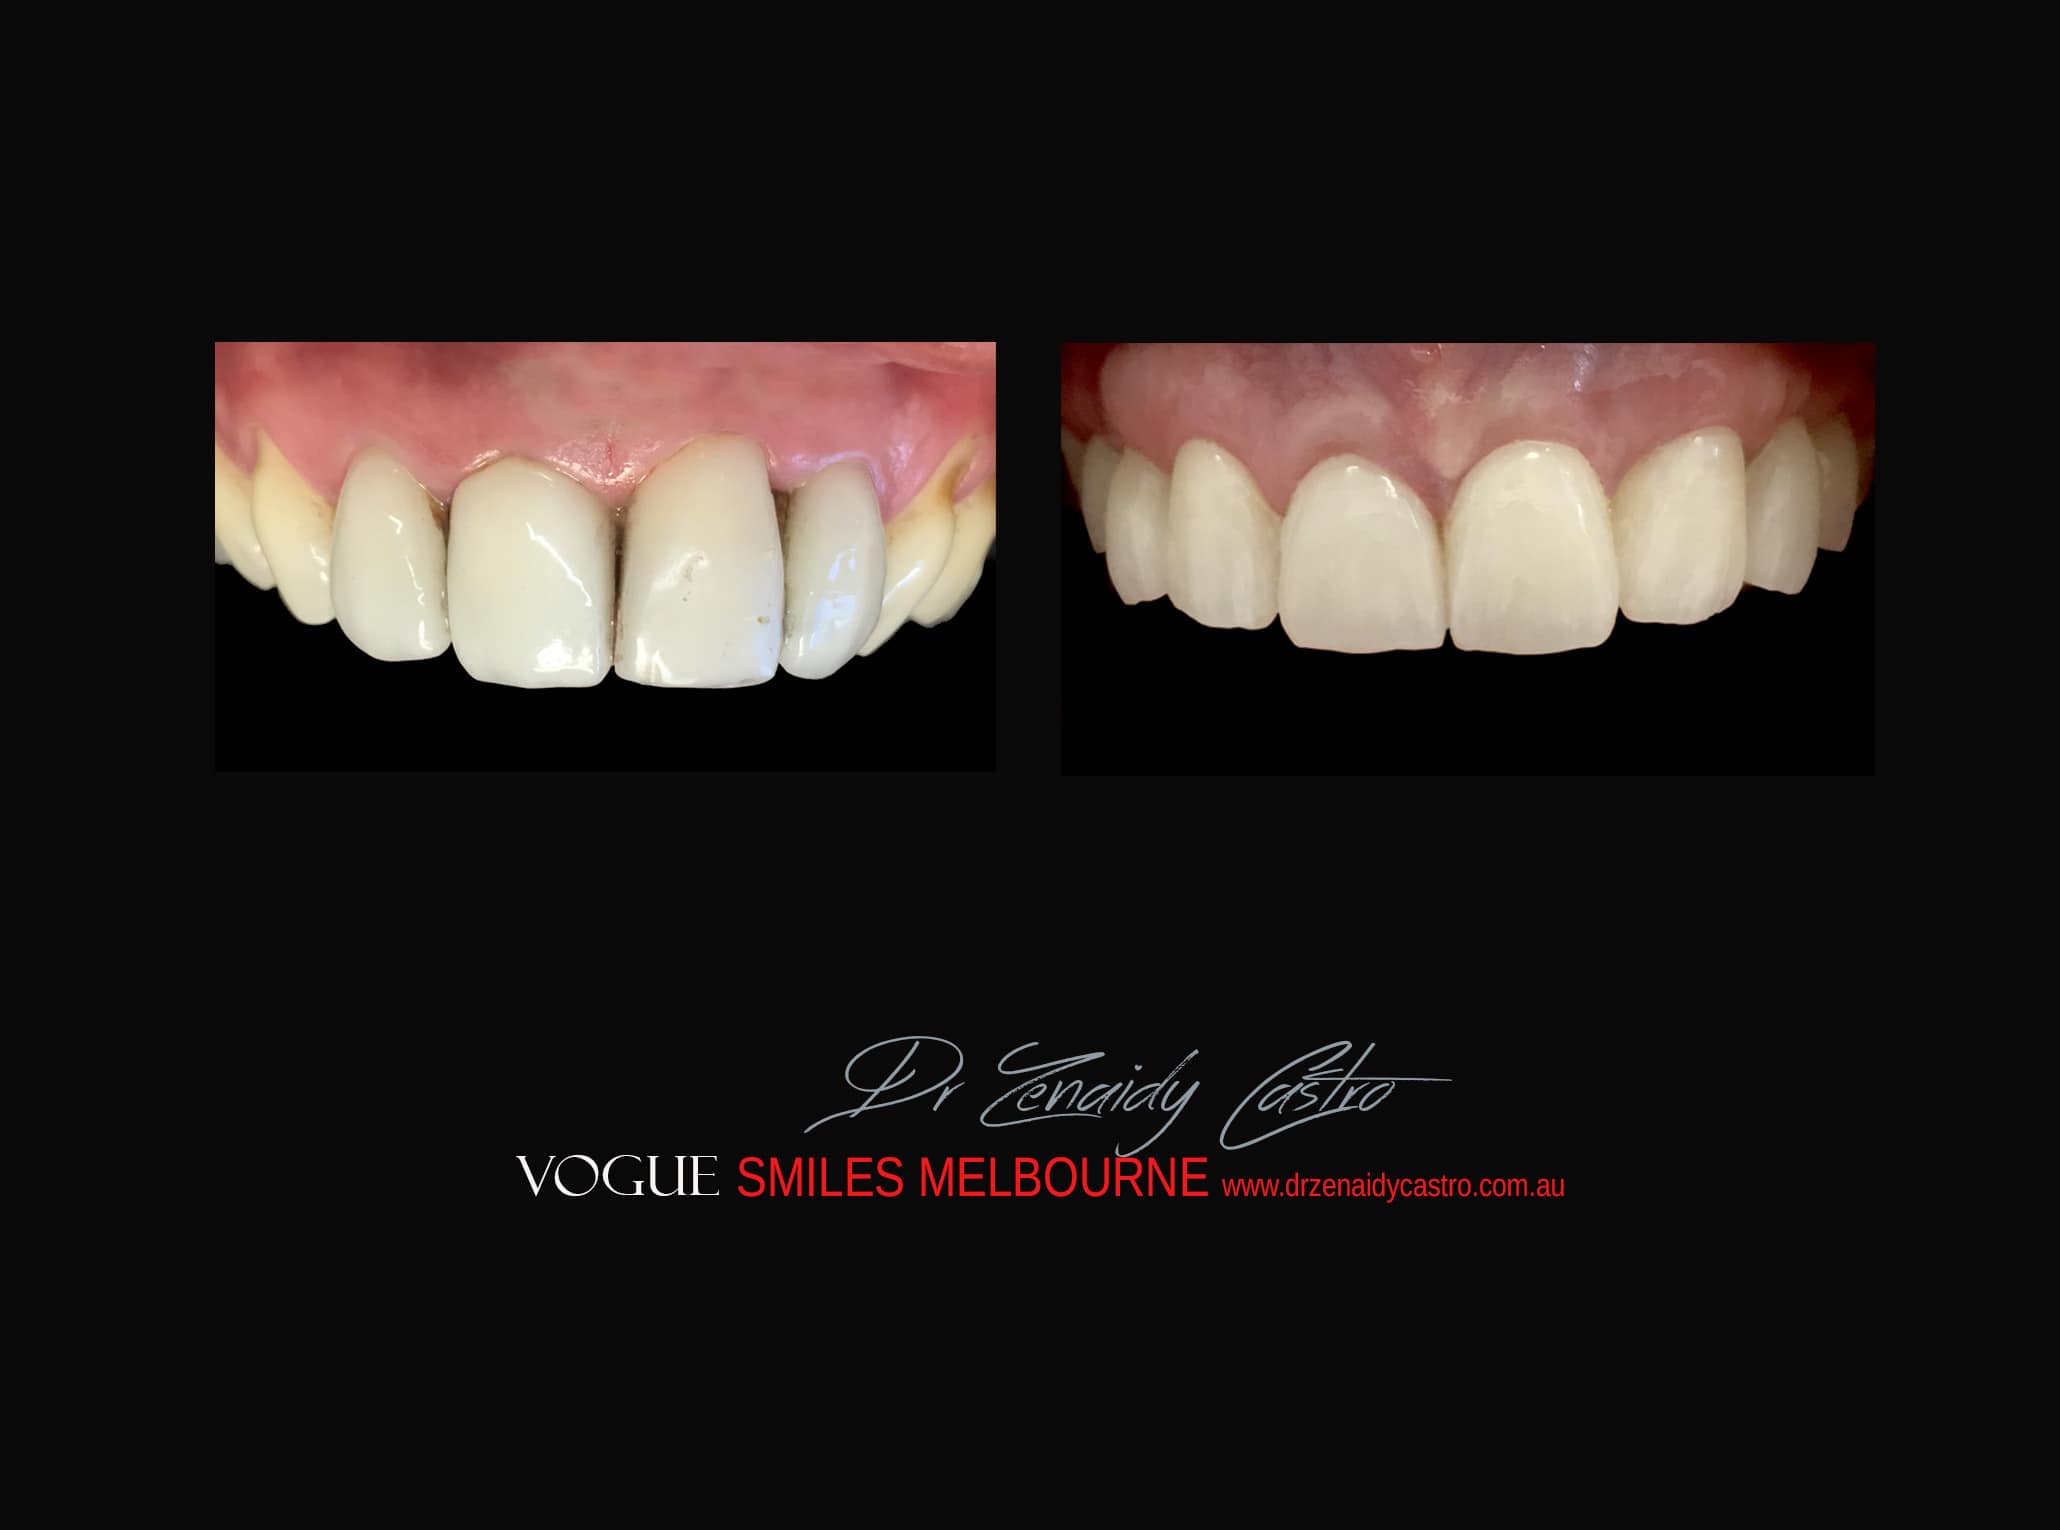 Top Cosmetic Dentist in Melbourne CBD before and after photo case study 21